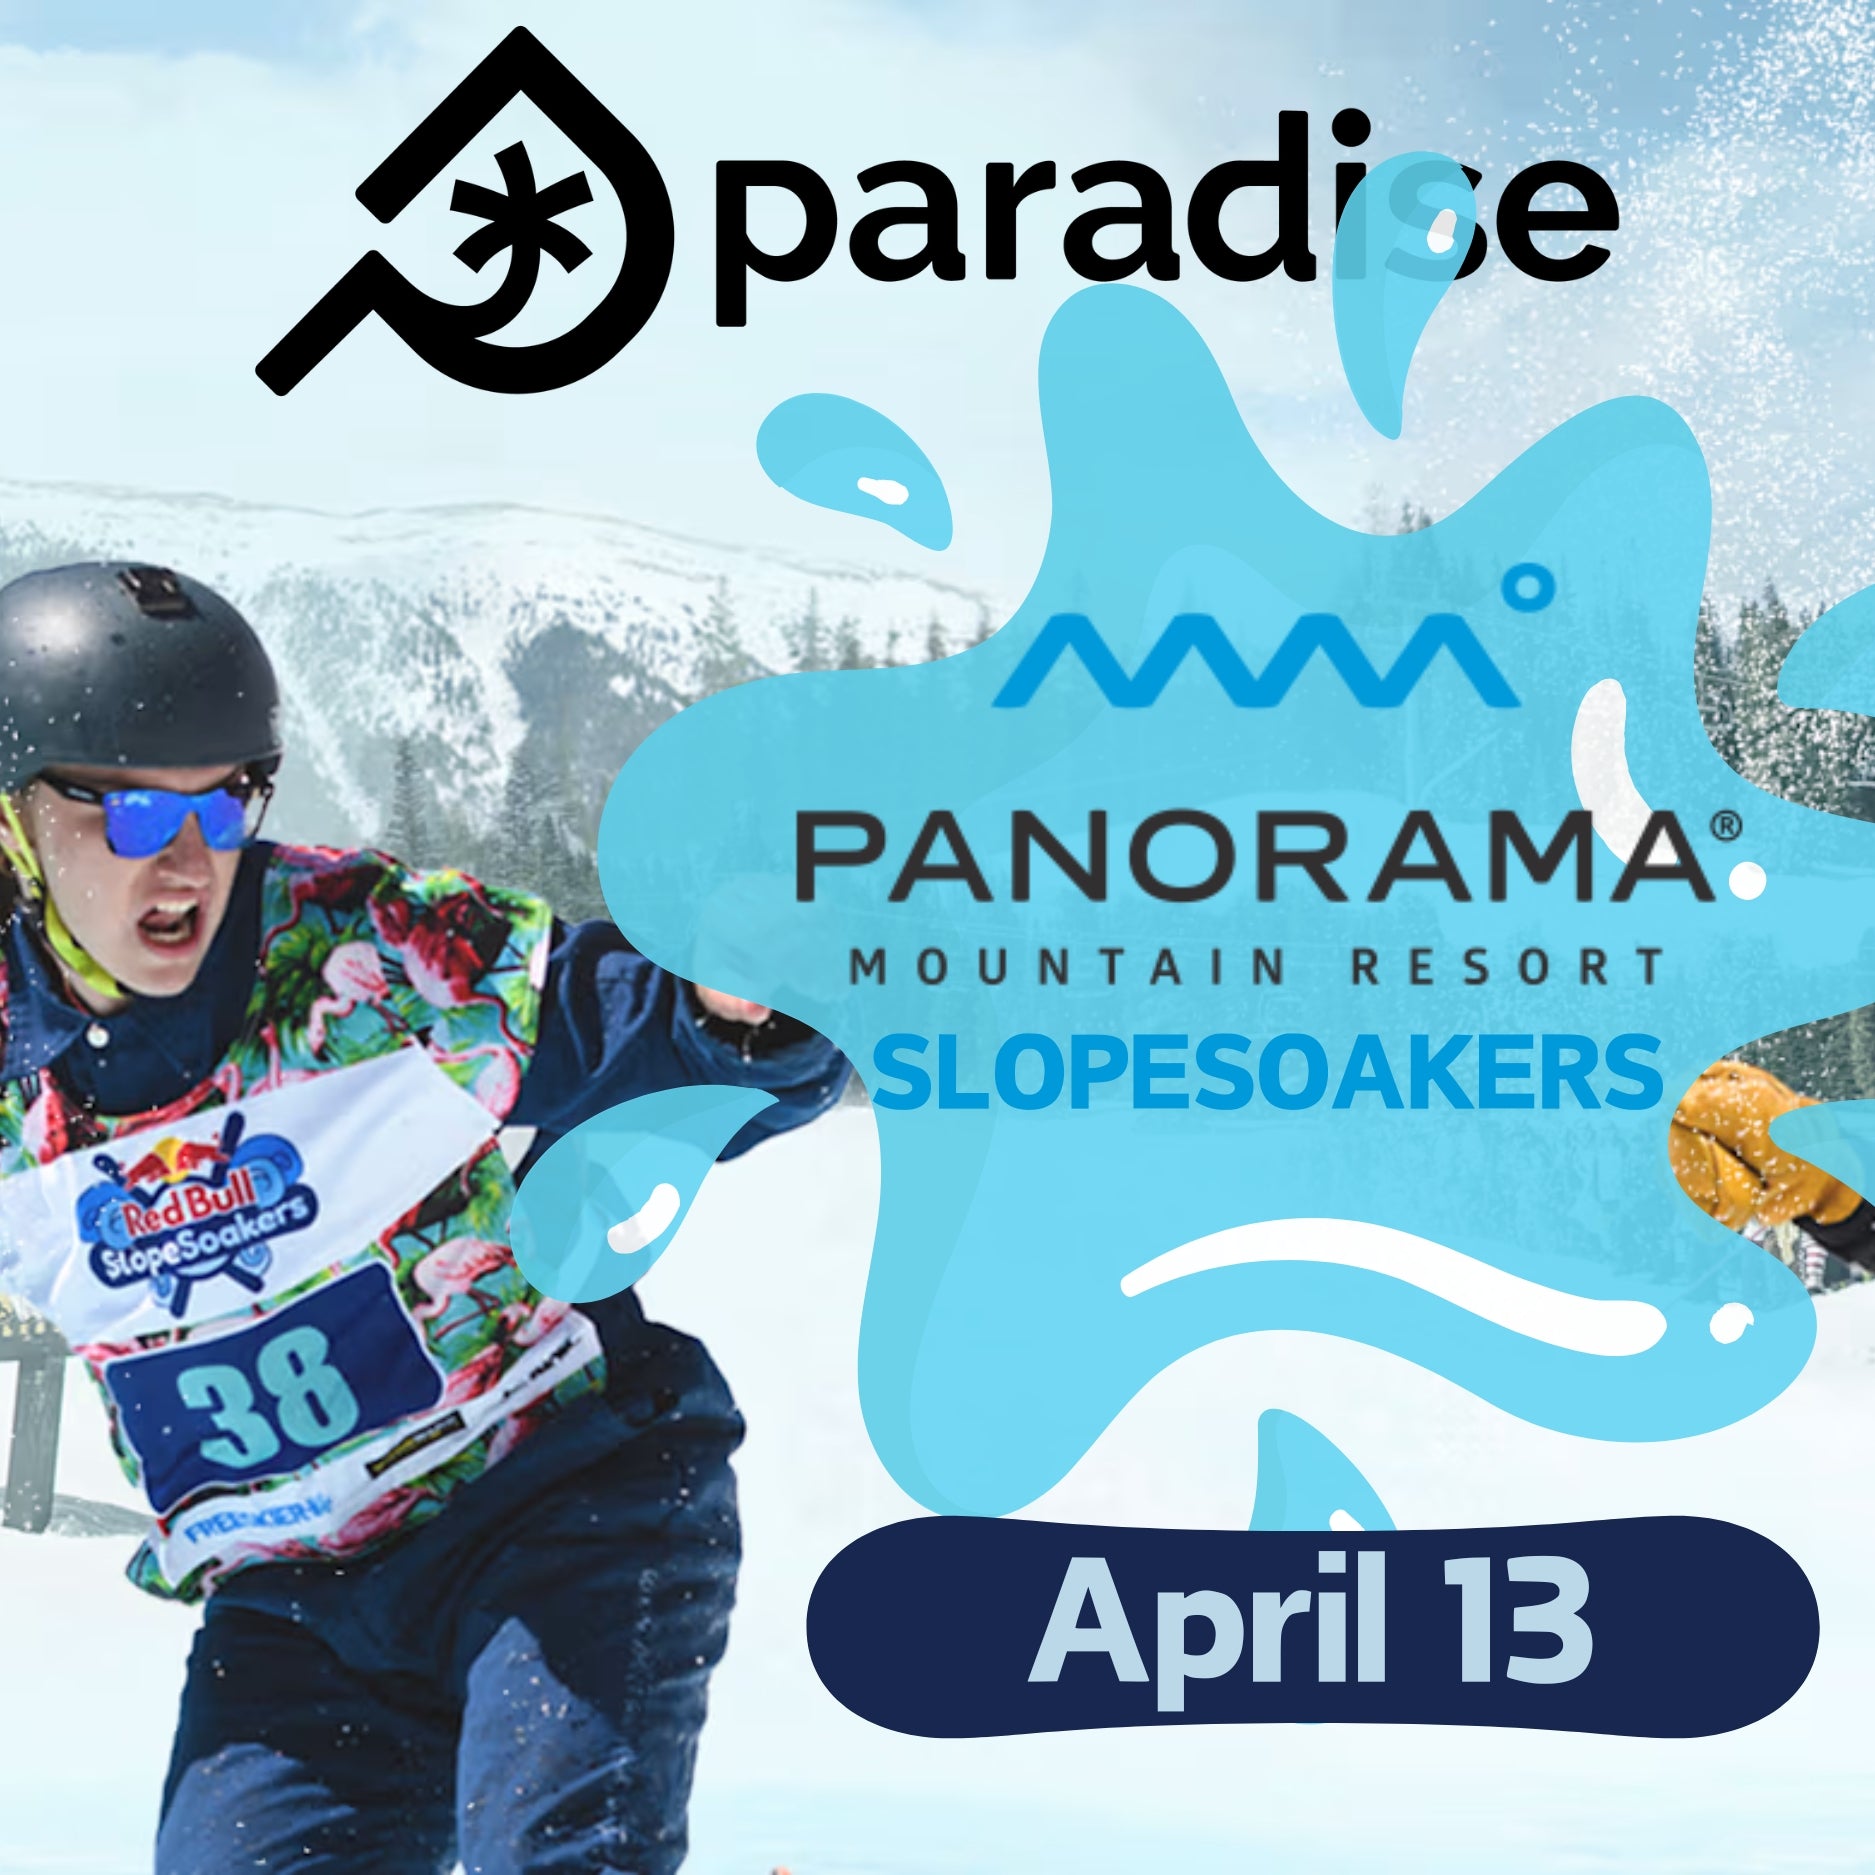 Paradise Skis is an official sponsor of Red Bull Slopesoakers at Panorama Mountain Resort 